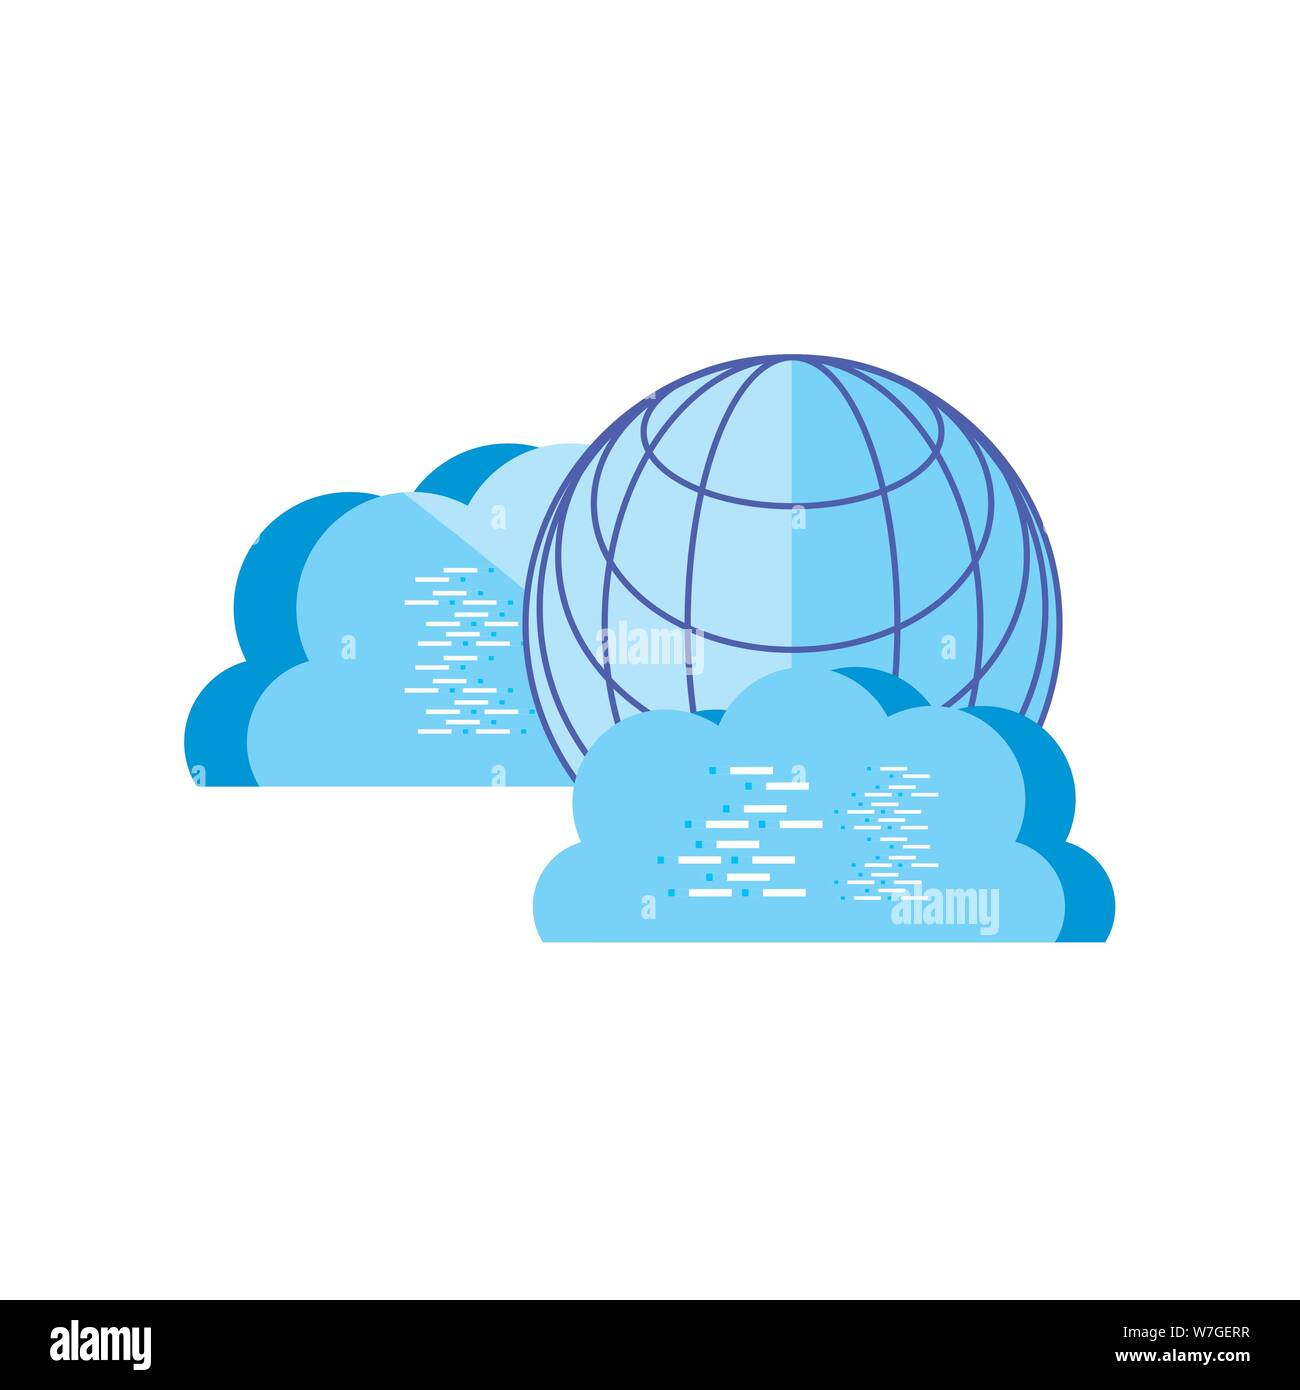 sphere browser technology with cloud computing vector illustration design Stock Vector